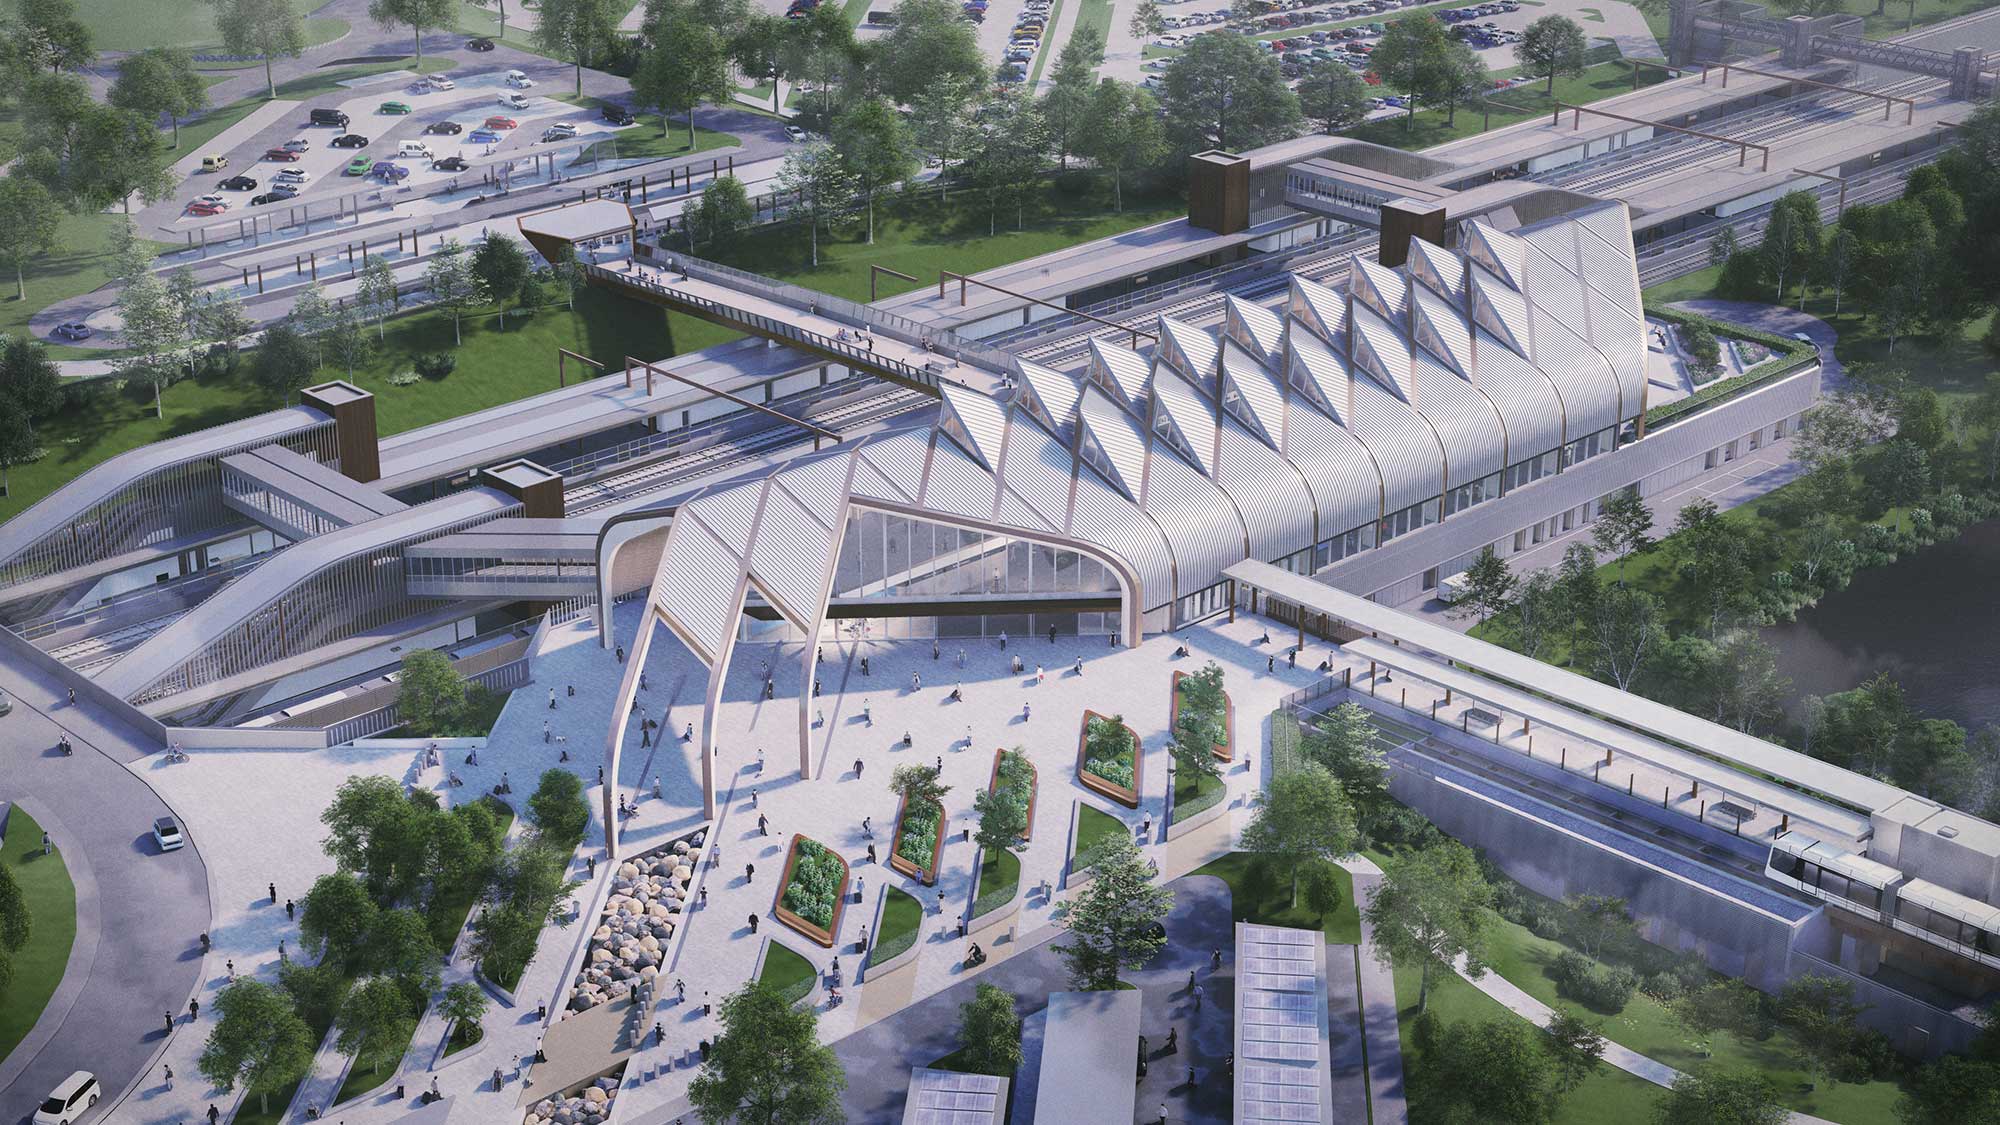 Impression of what the new HS2 interchange station will look like